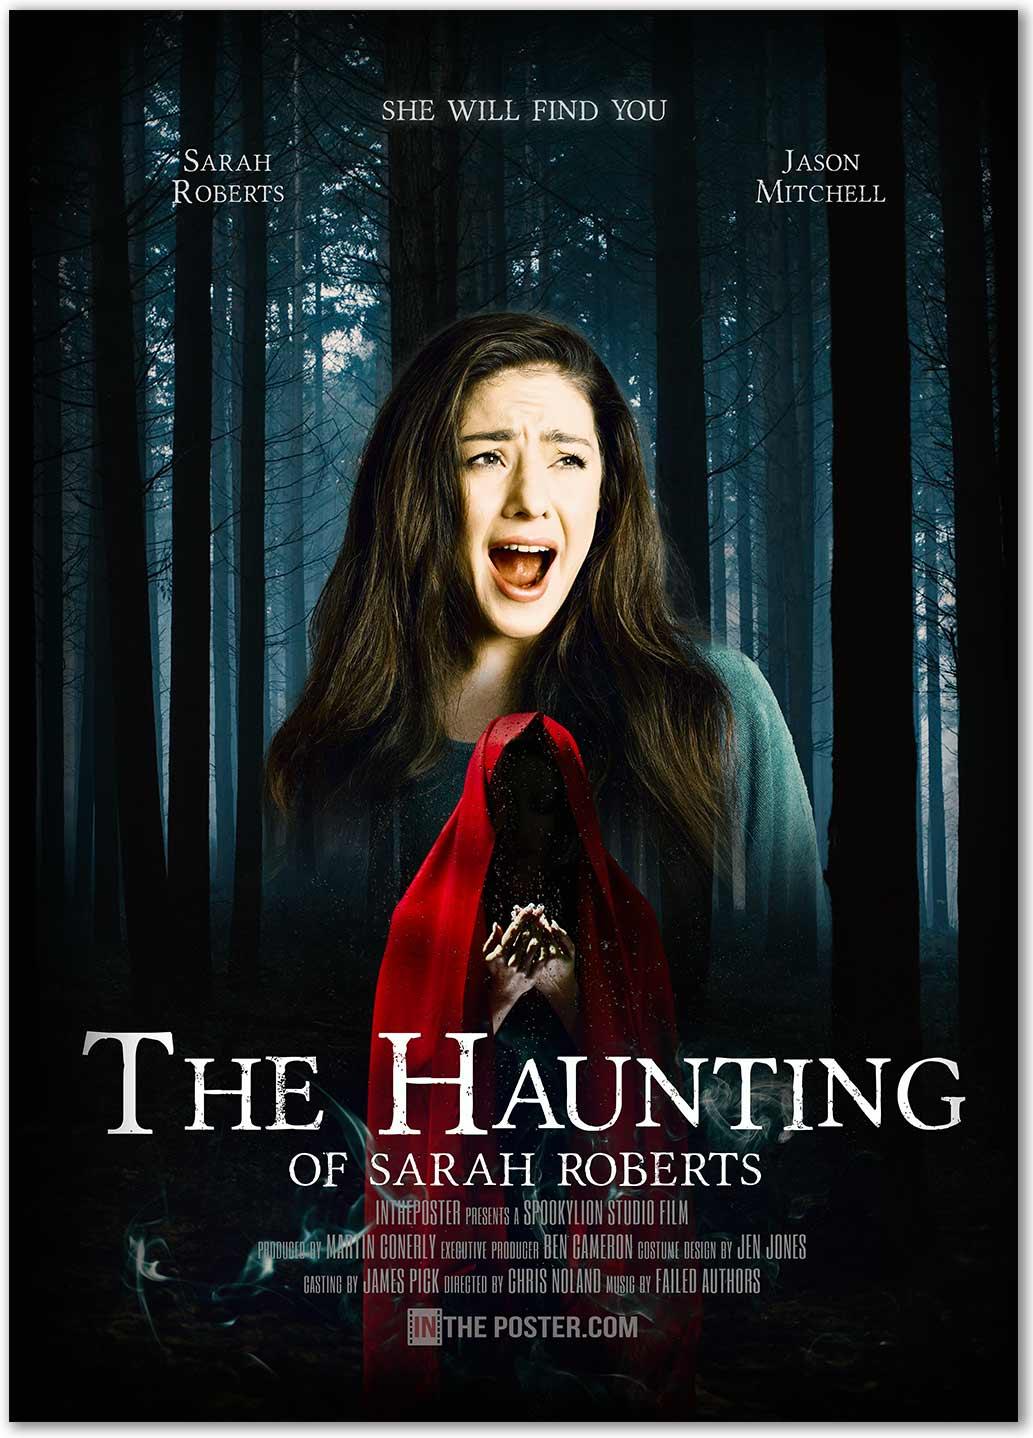 The Haunting personalized movie poster with a girl screaming, above a woman in a red cloak with a dark forest in the background.